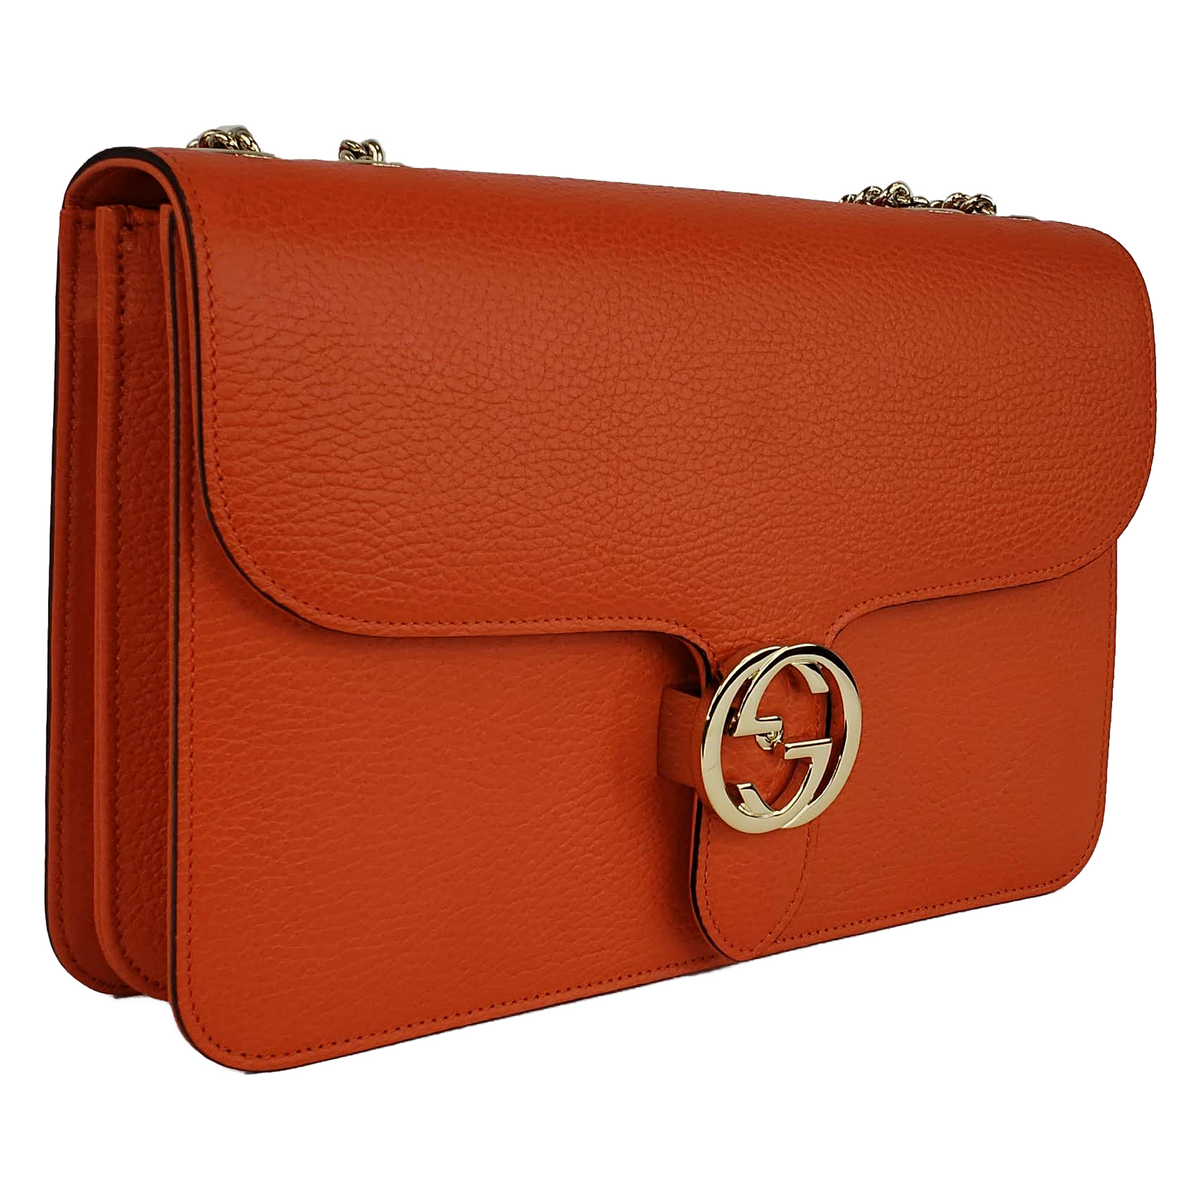 GUCCI GG Guccissima Cosmetic Pouch Makeup Bag Orange Brown Leather